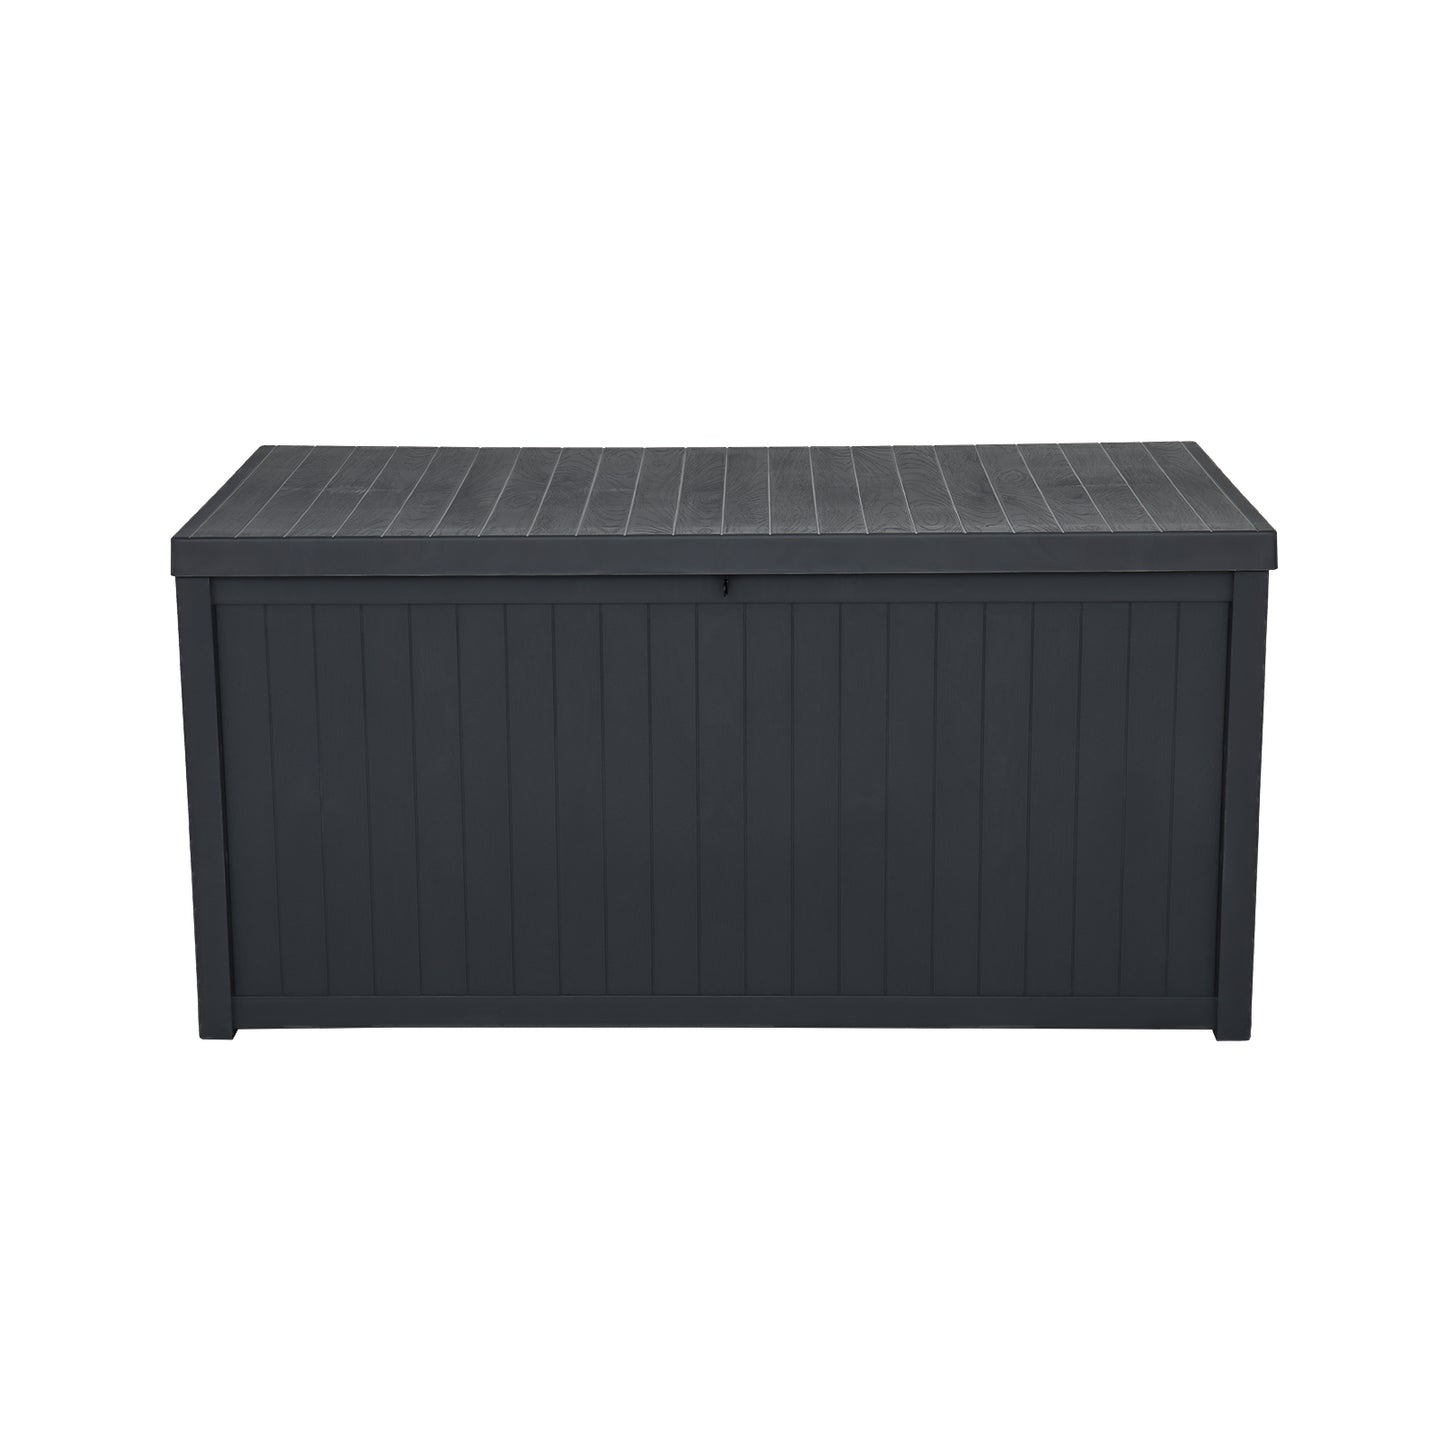 SYNGAR 113 Gallon Resin Deck Box, Patio Large Storage Cabinet, Outdoor Waterproof Storage Chest, Storage Container with Lid, for Outside Furniture Cushions, Garden Tools, Kids' Toys, Black, Y027